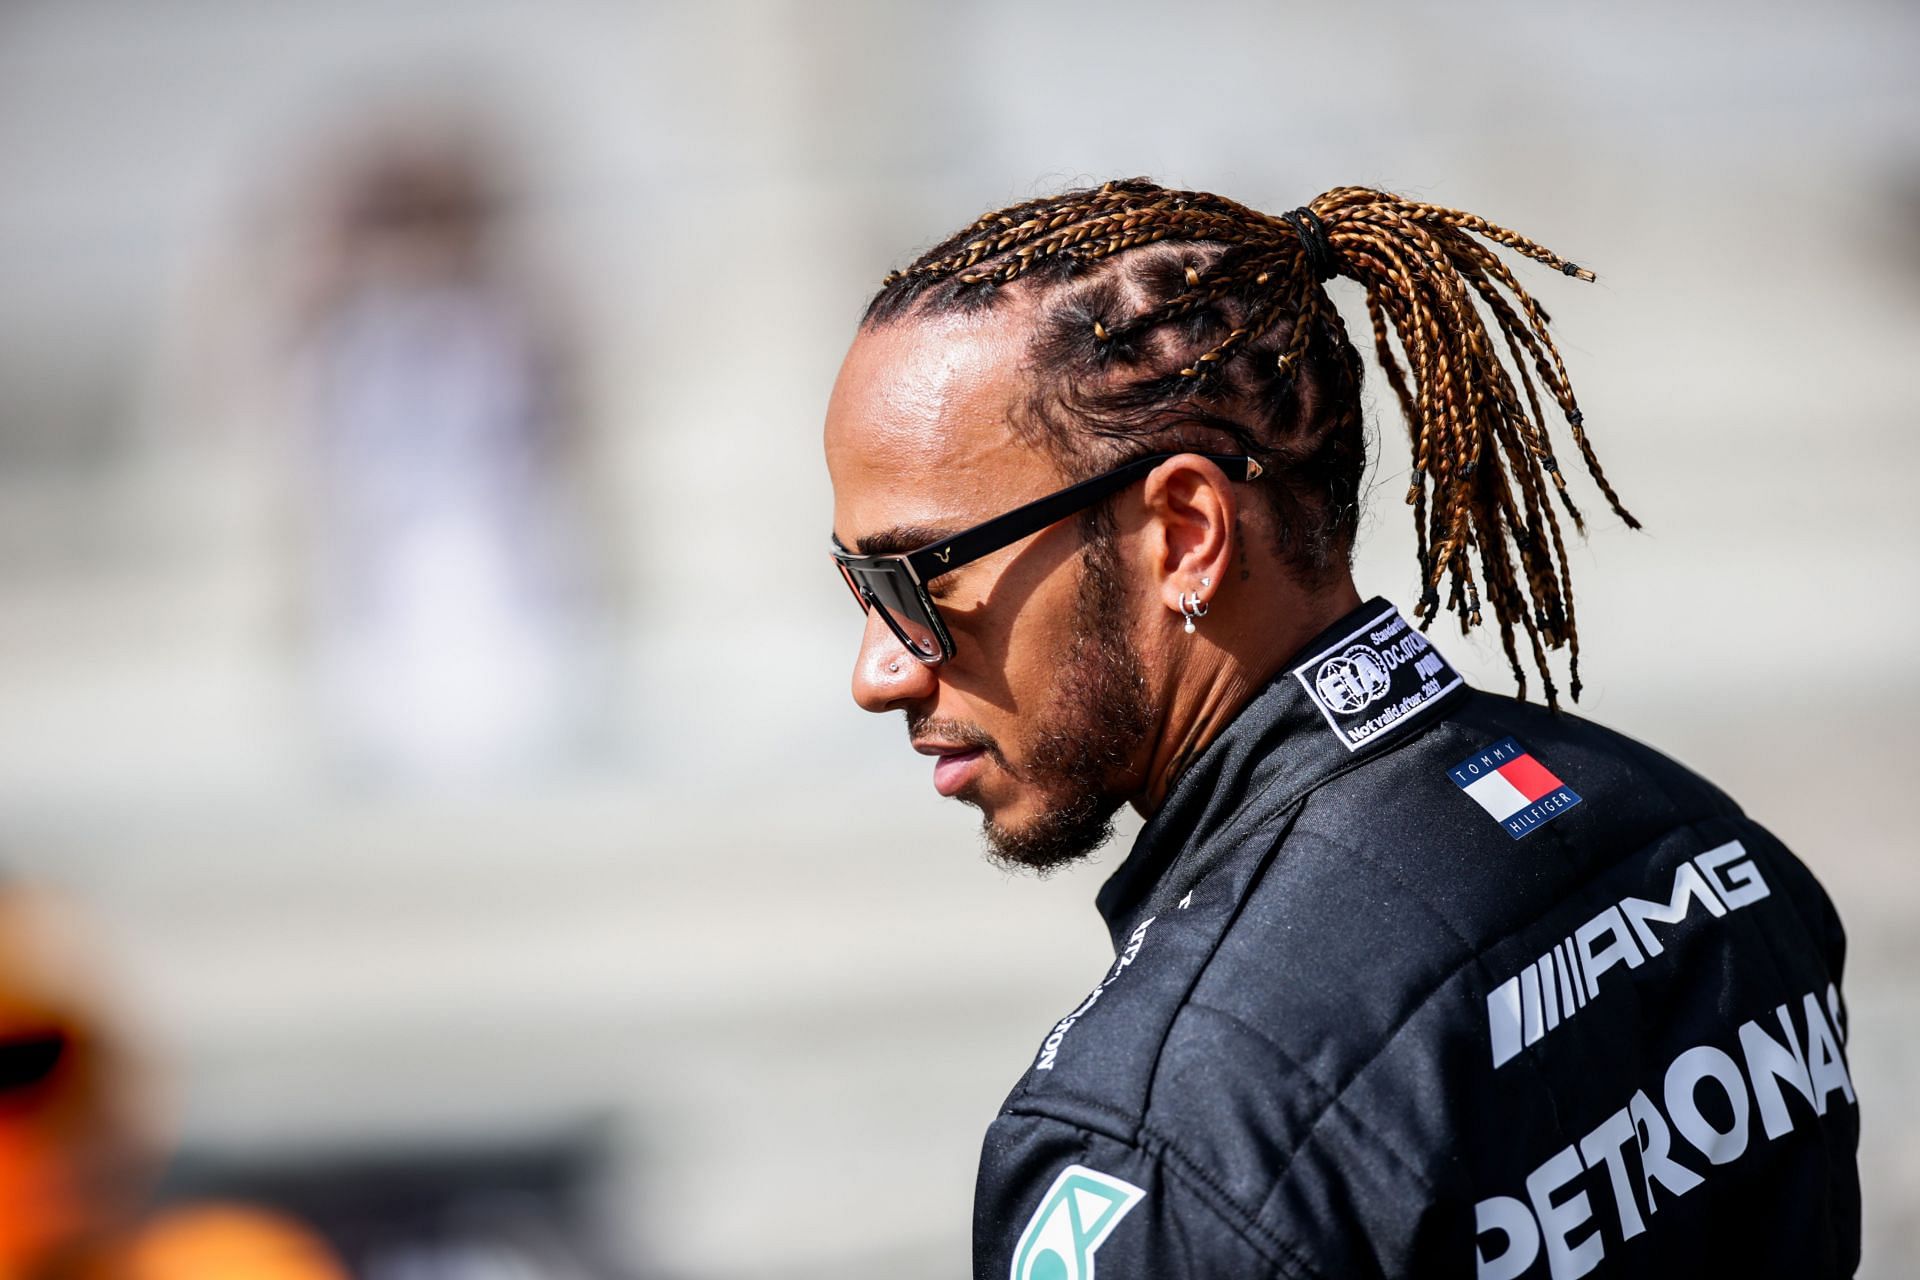 Lewis Hamilton might be driving his last season in F1 in 2022